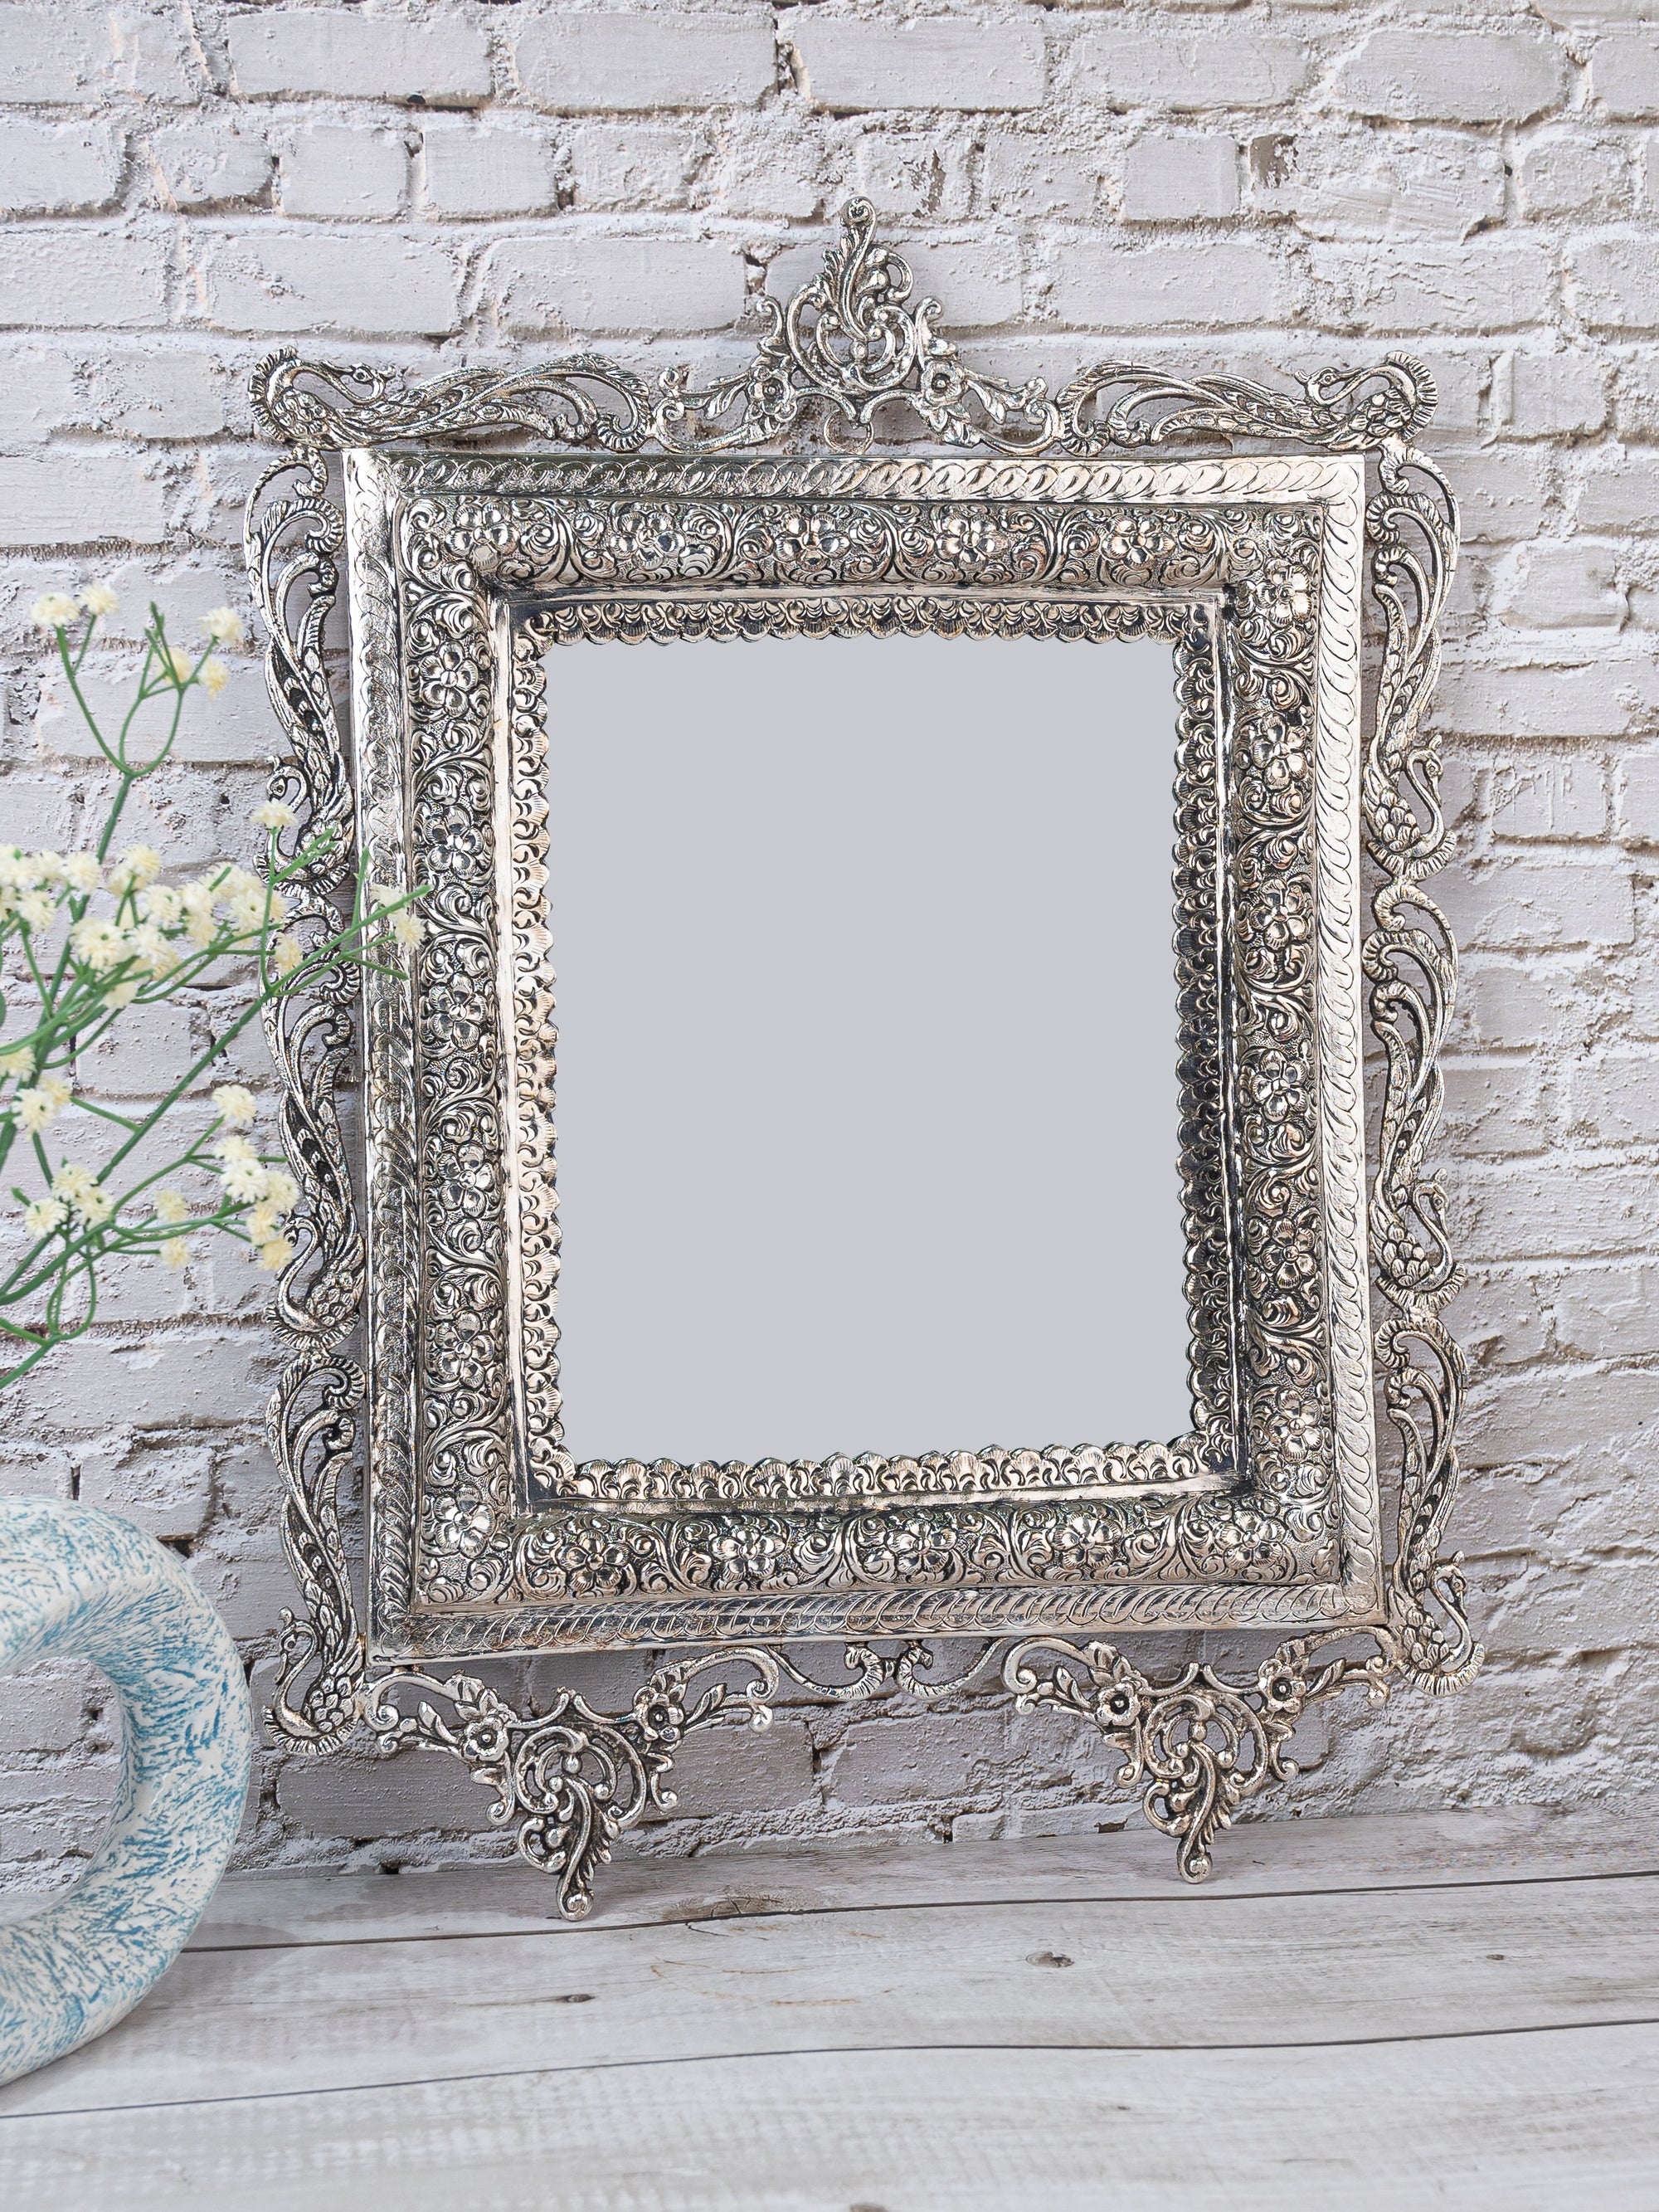 Oxidized Silver Finish Vintage Charm Rectangular Wall Mirror - 16 inches